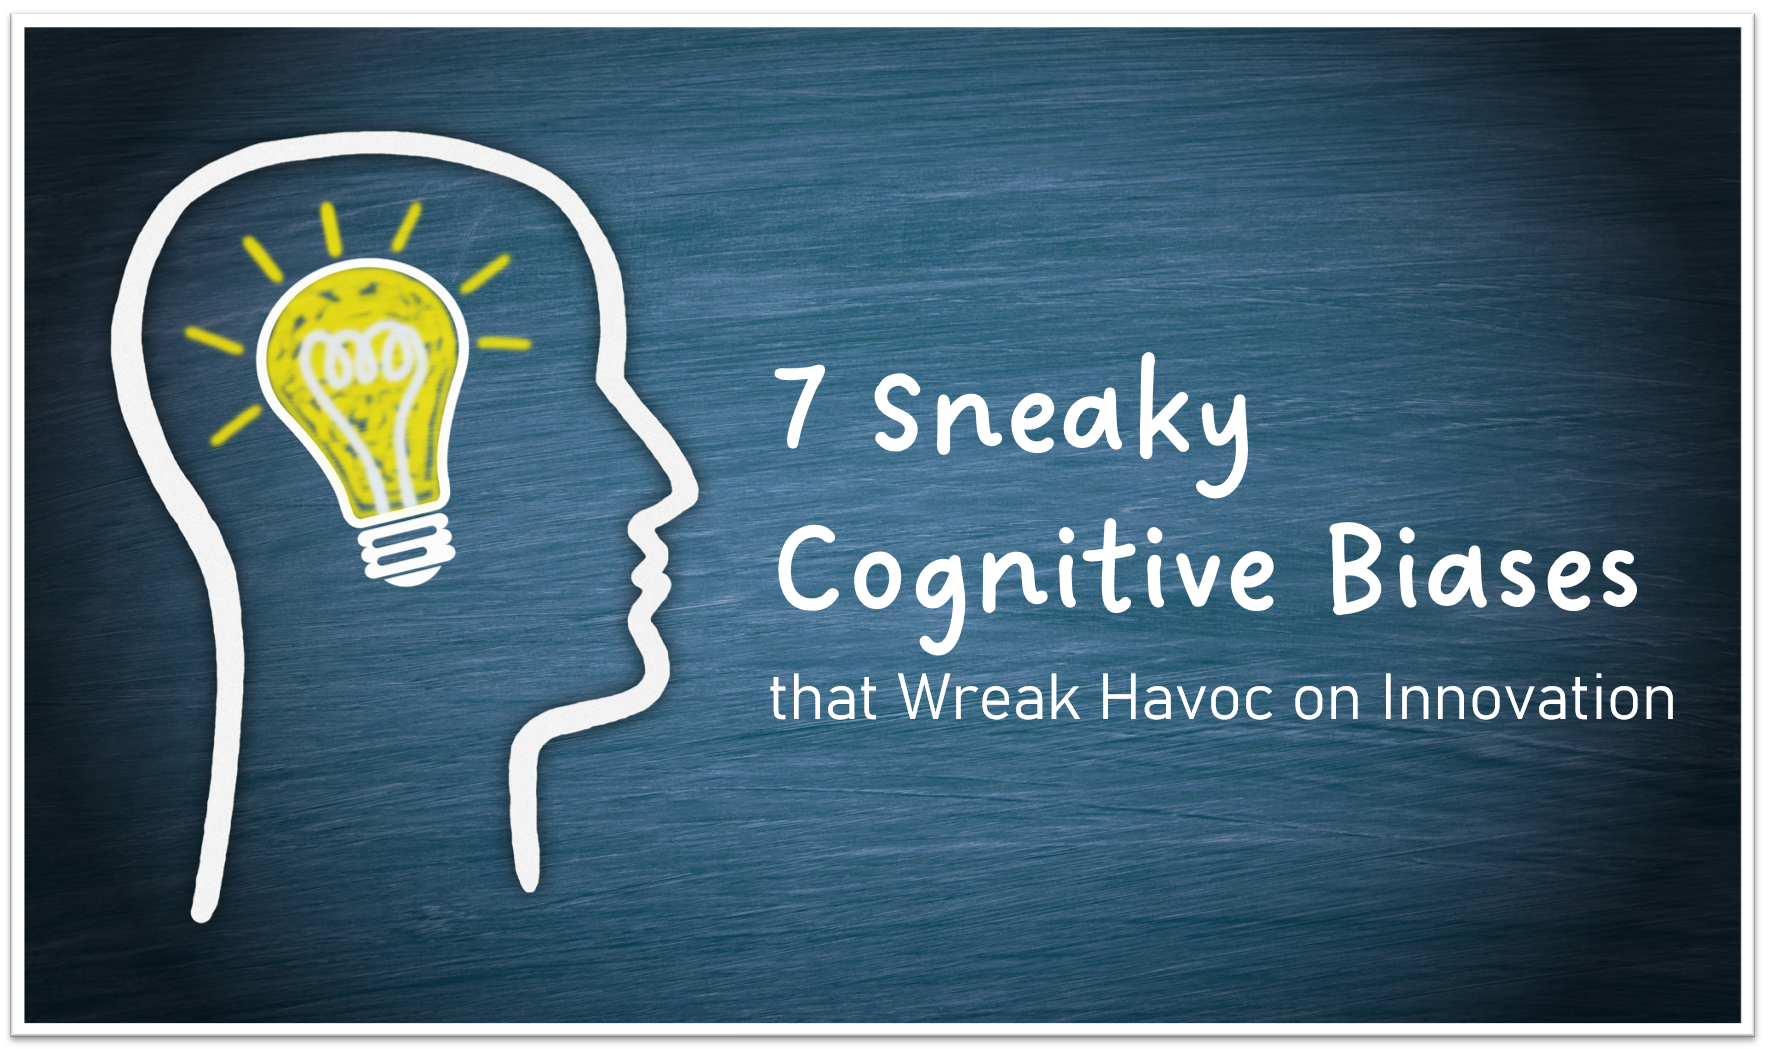 7 Sneaky Cognitive Biases that Wreak Havoc on Innovation